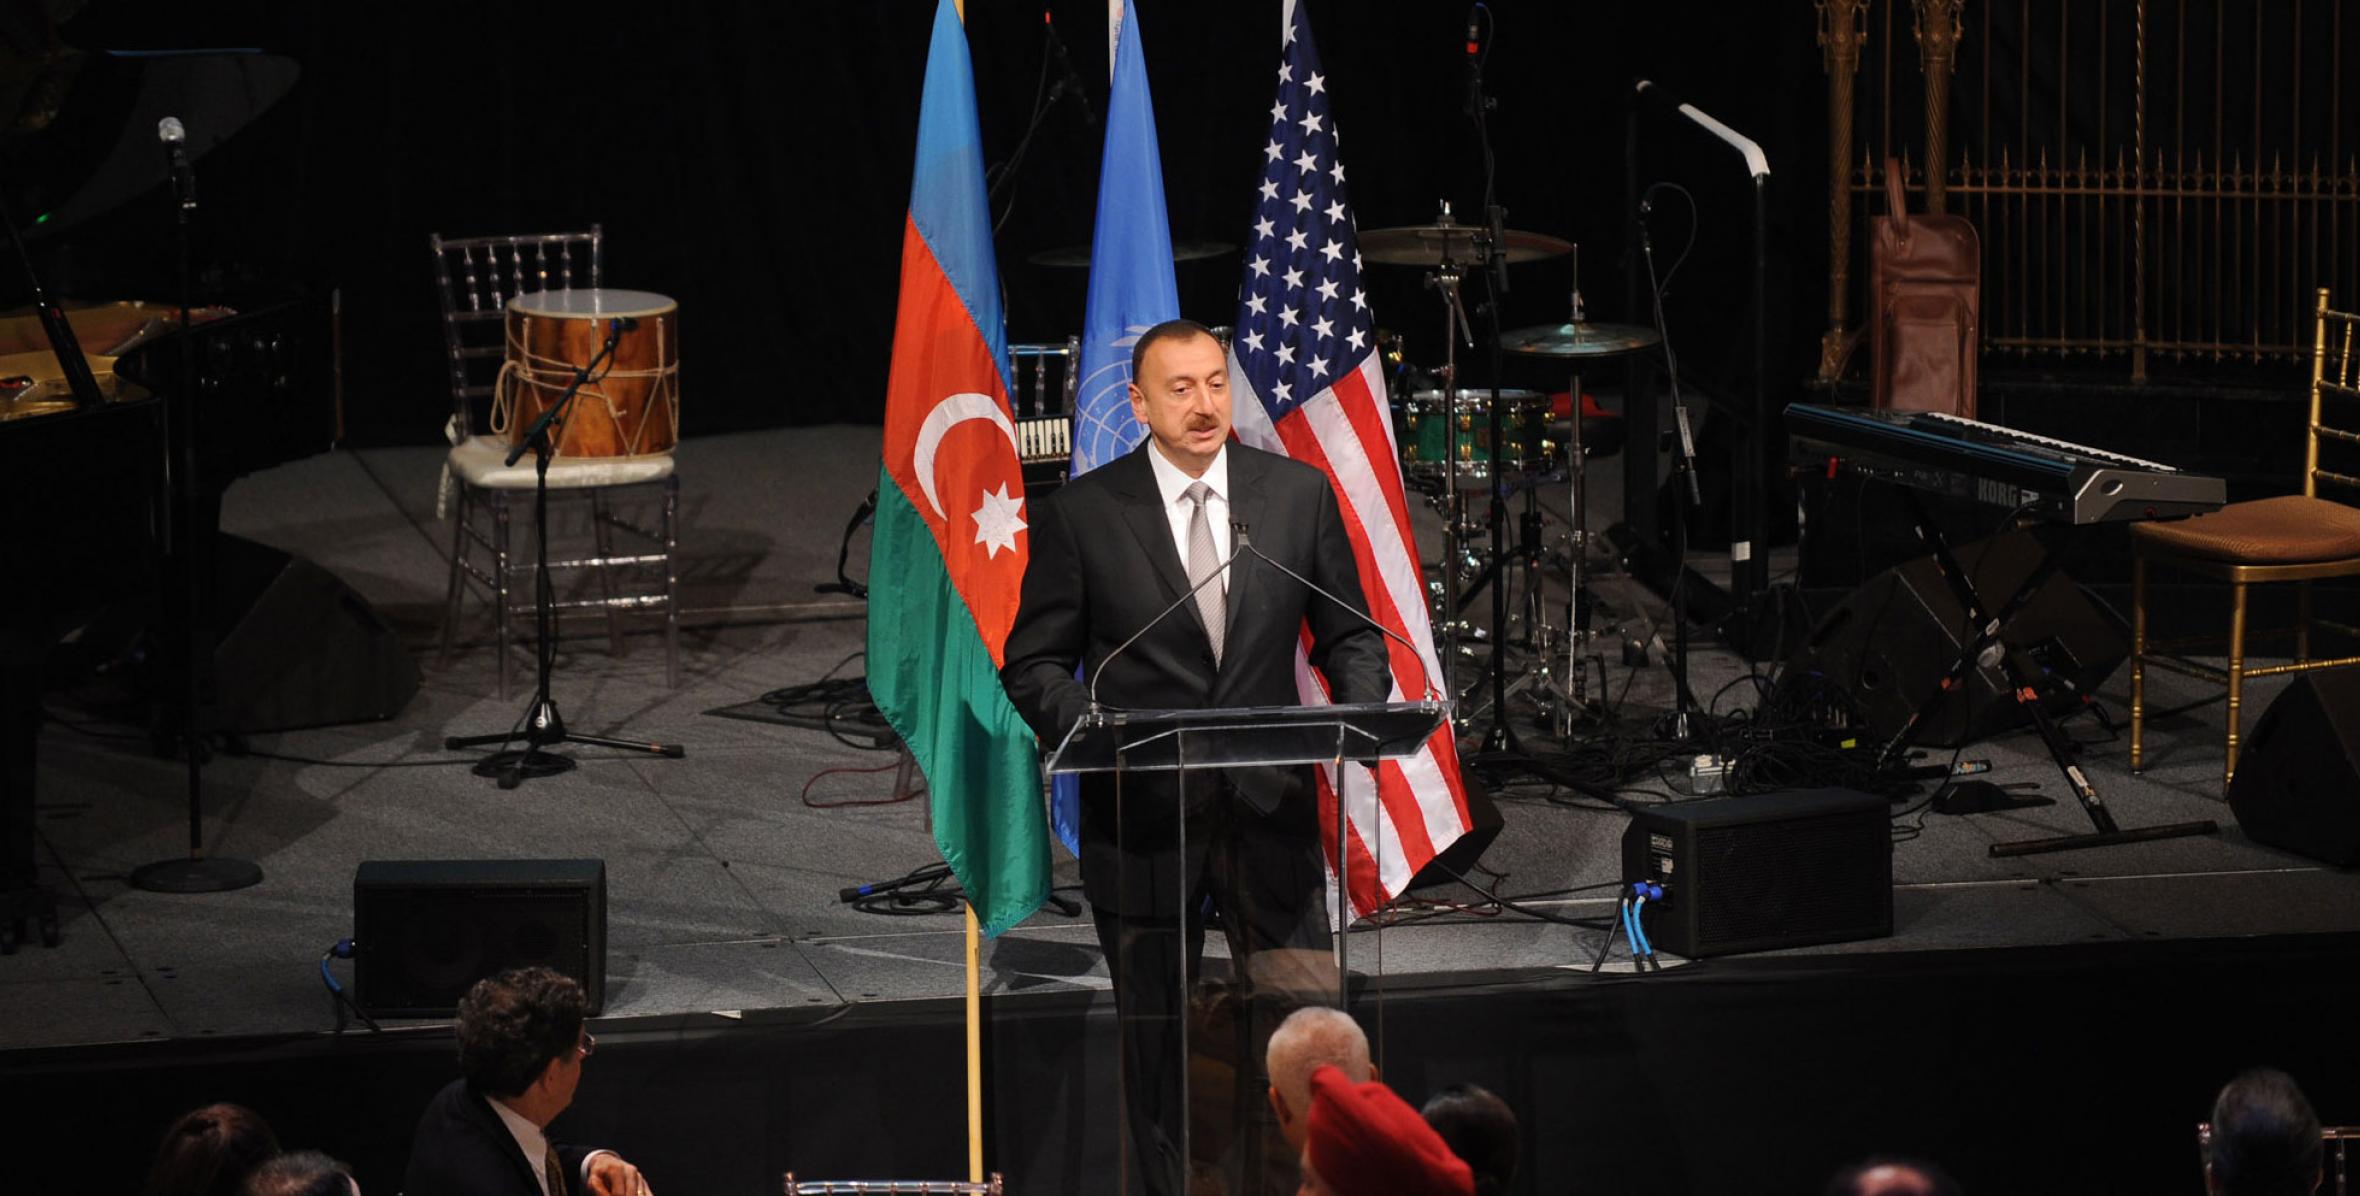 Speech by Ilham Aliyev at the reception on the occasion of the 20th anniversary of membership of the Republic of Azerbaijan in the United Nations